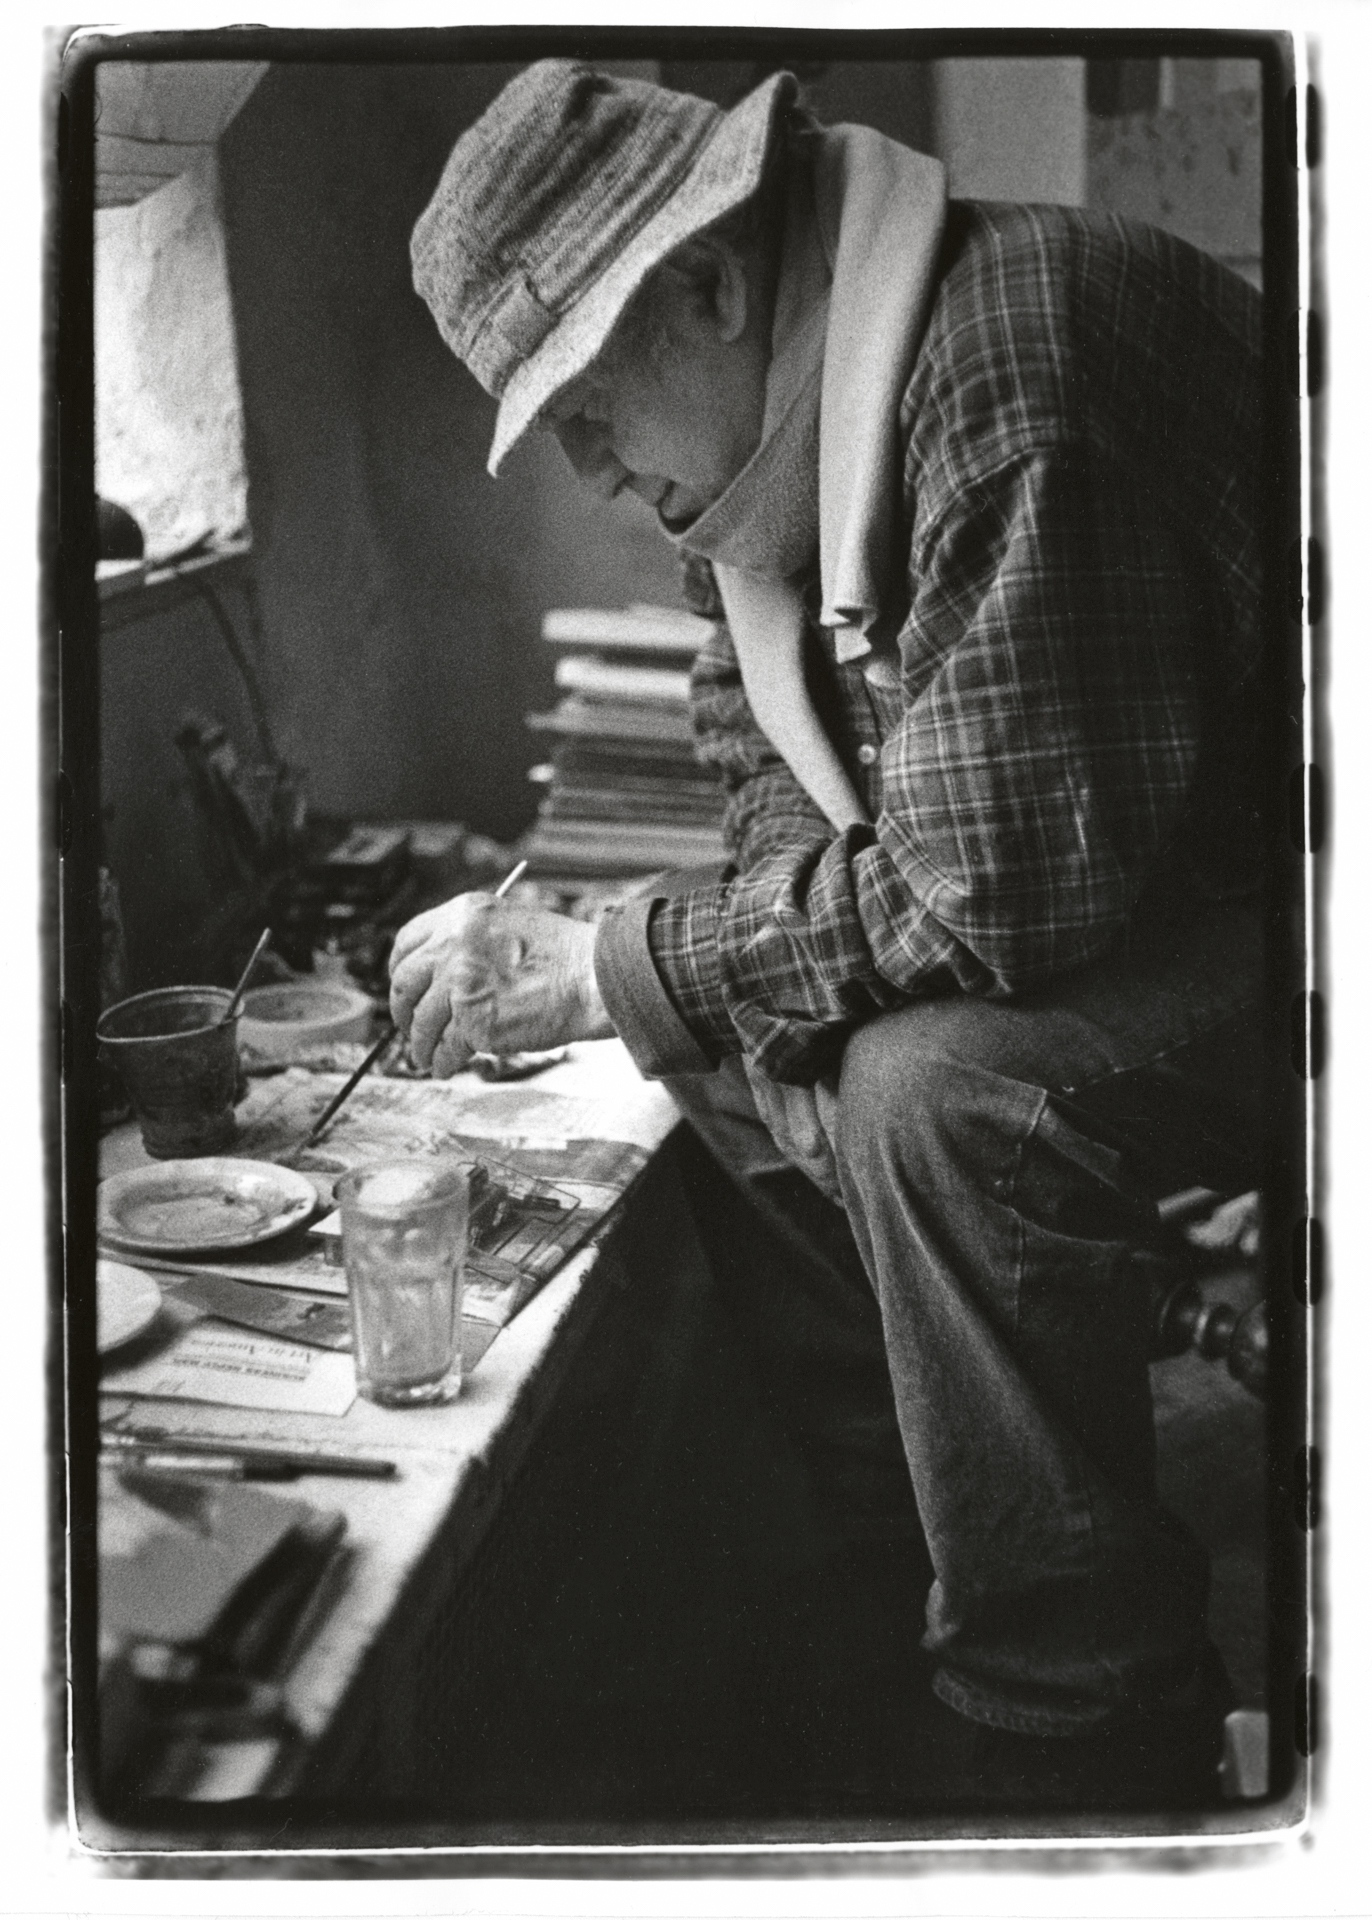 Leiter in his studio, 2003.
Photograph by Anders Goldfarb.